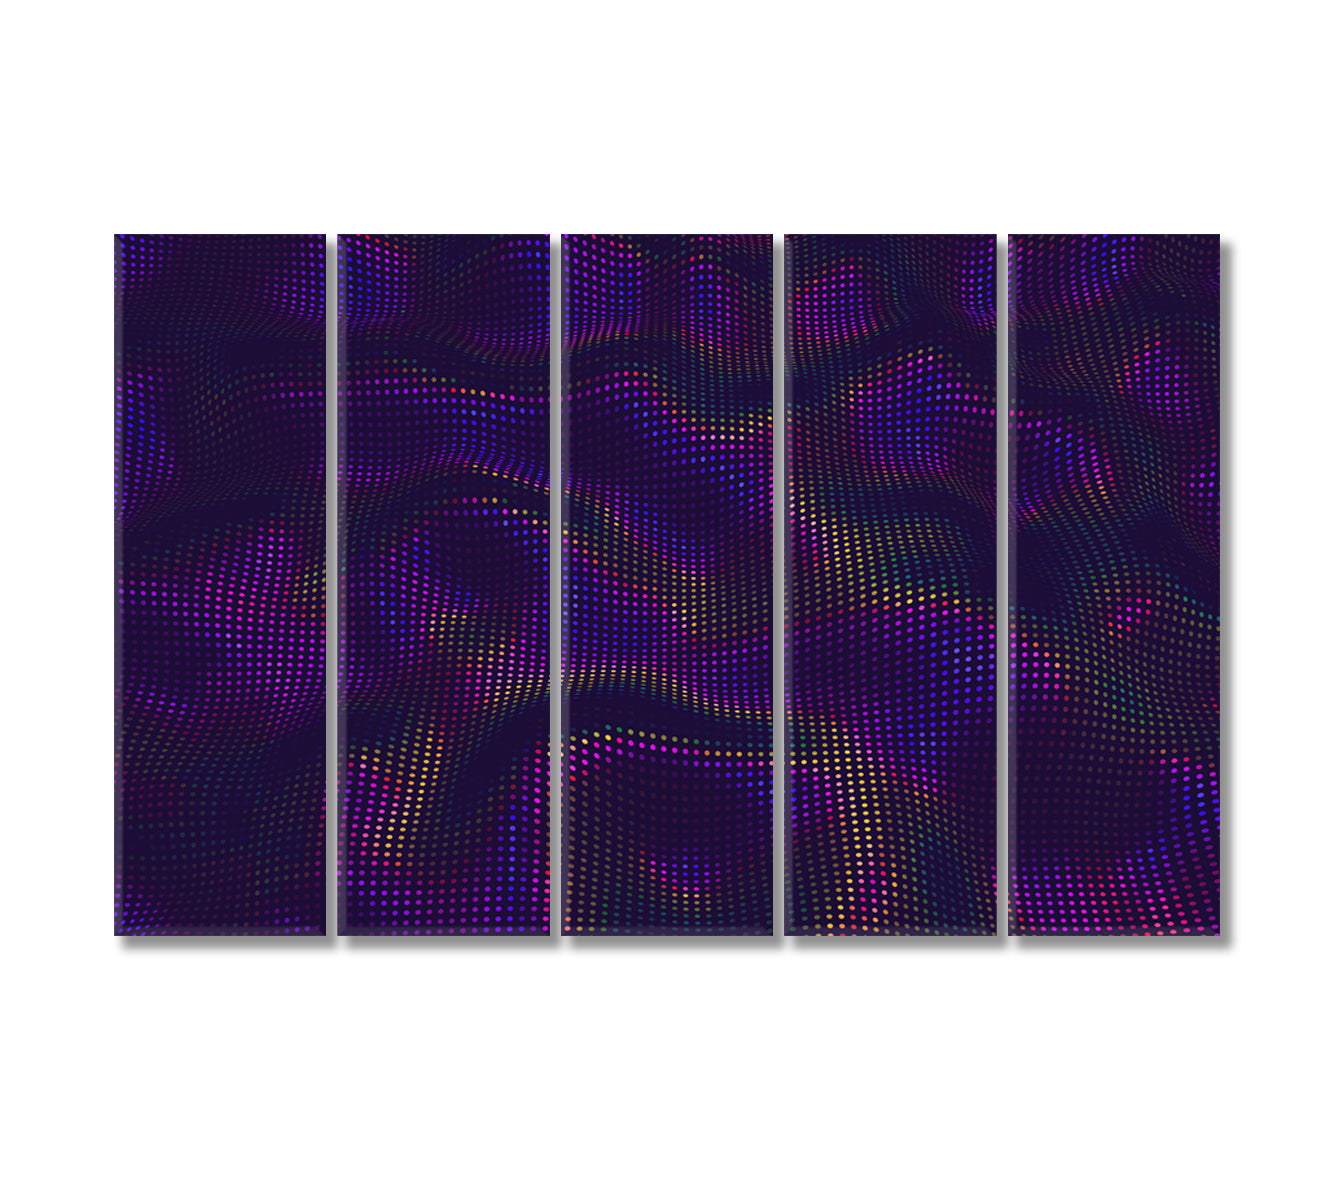 Holographic Iridescent Abstract Waves Canvas Print-Canvas Print-CetArt-5 Panels-36x24 inches-CetArt